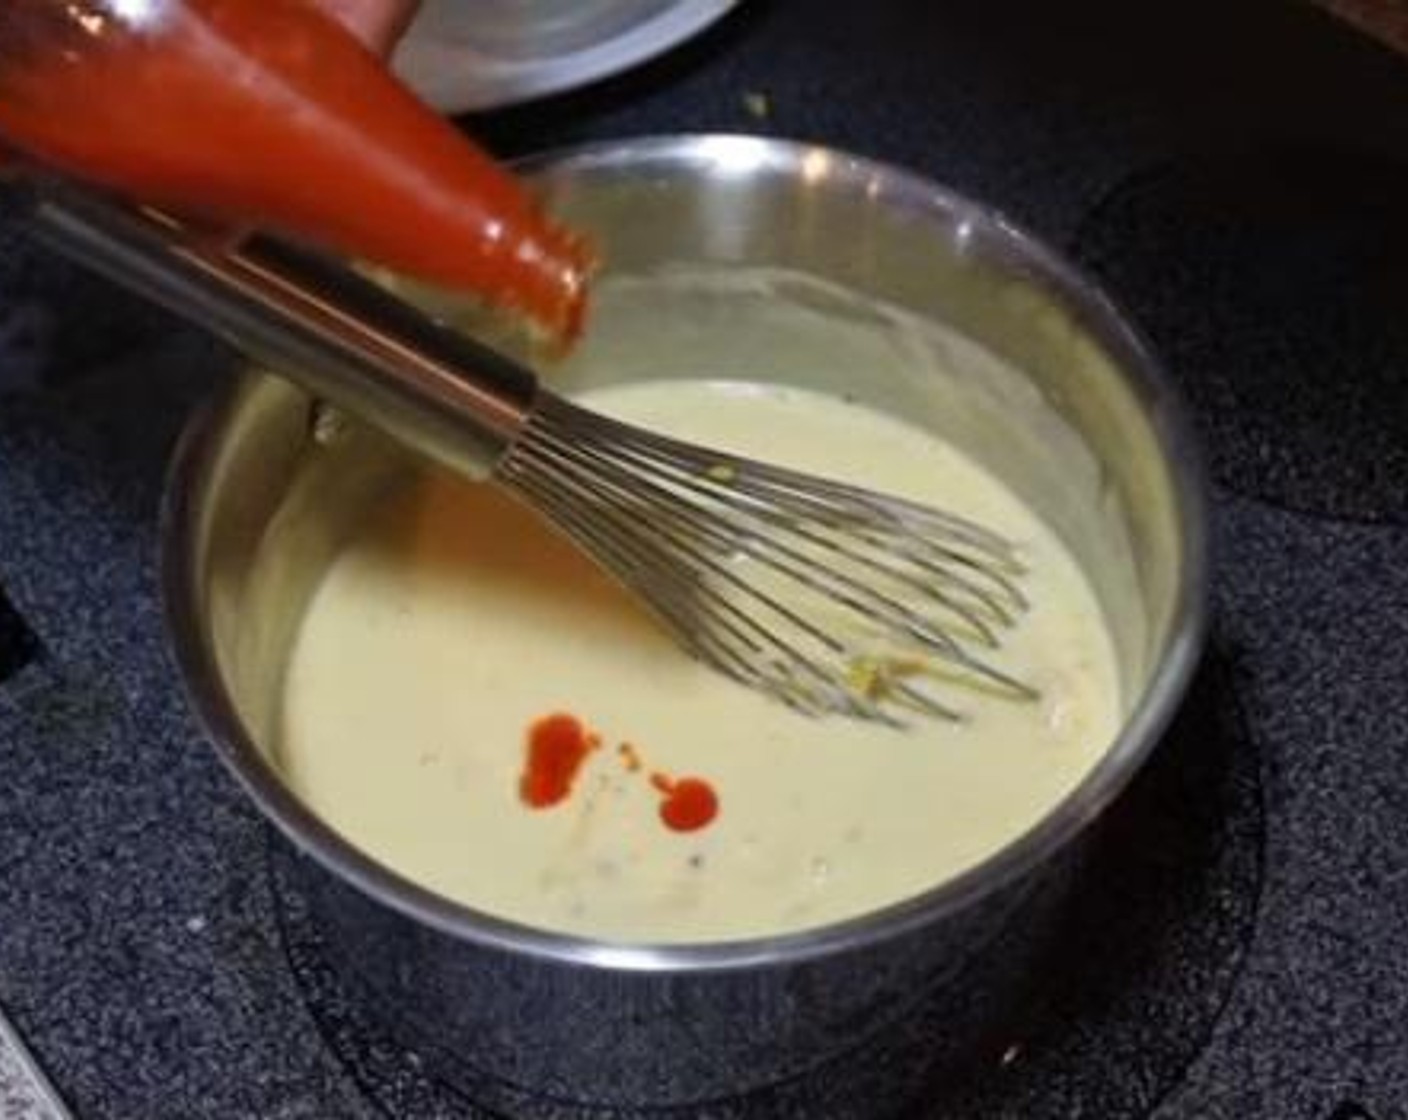 step 3 Start adding the Pepper Jack Cheese (2 cups) and Shredded Sharp Cheddar Cheese (2 cups) a little at a time, stirring to melt. Once the cheese sauce comes together, add the Hot Sauce (1 tsp) and season with a pinch of Salt (to taste) and Ground Black Pepper (to taste).